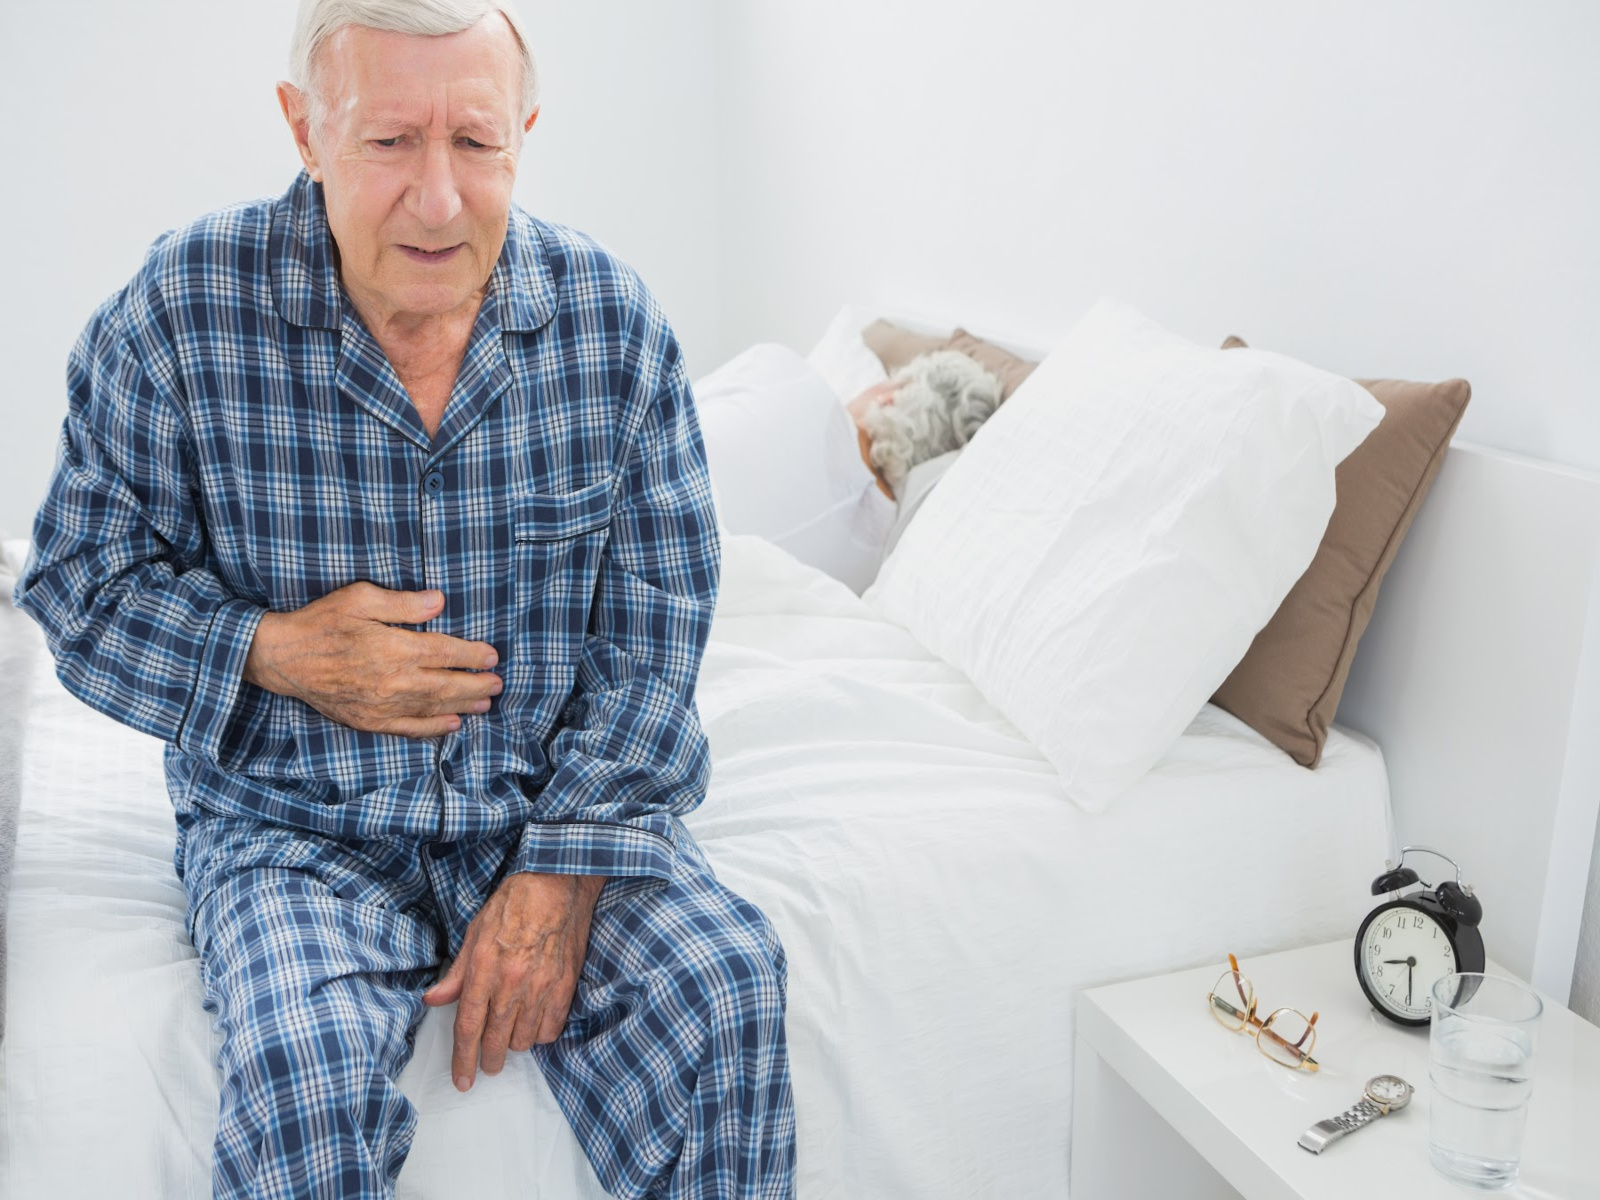 Which is the most common malabsorption disorder?